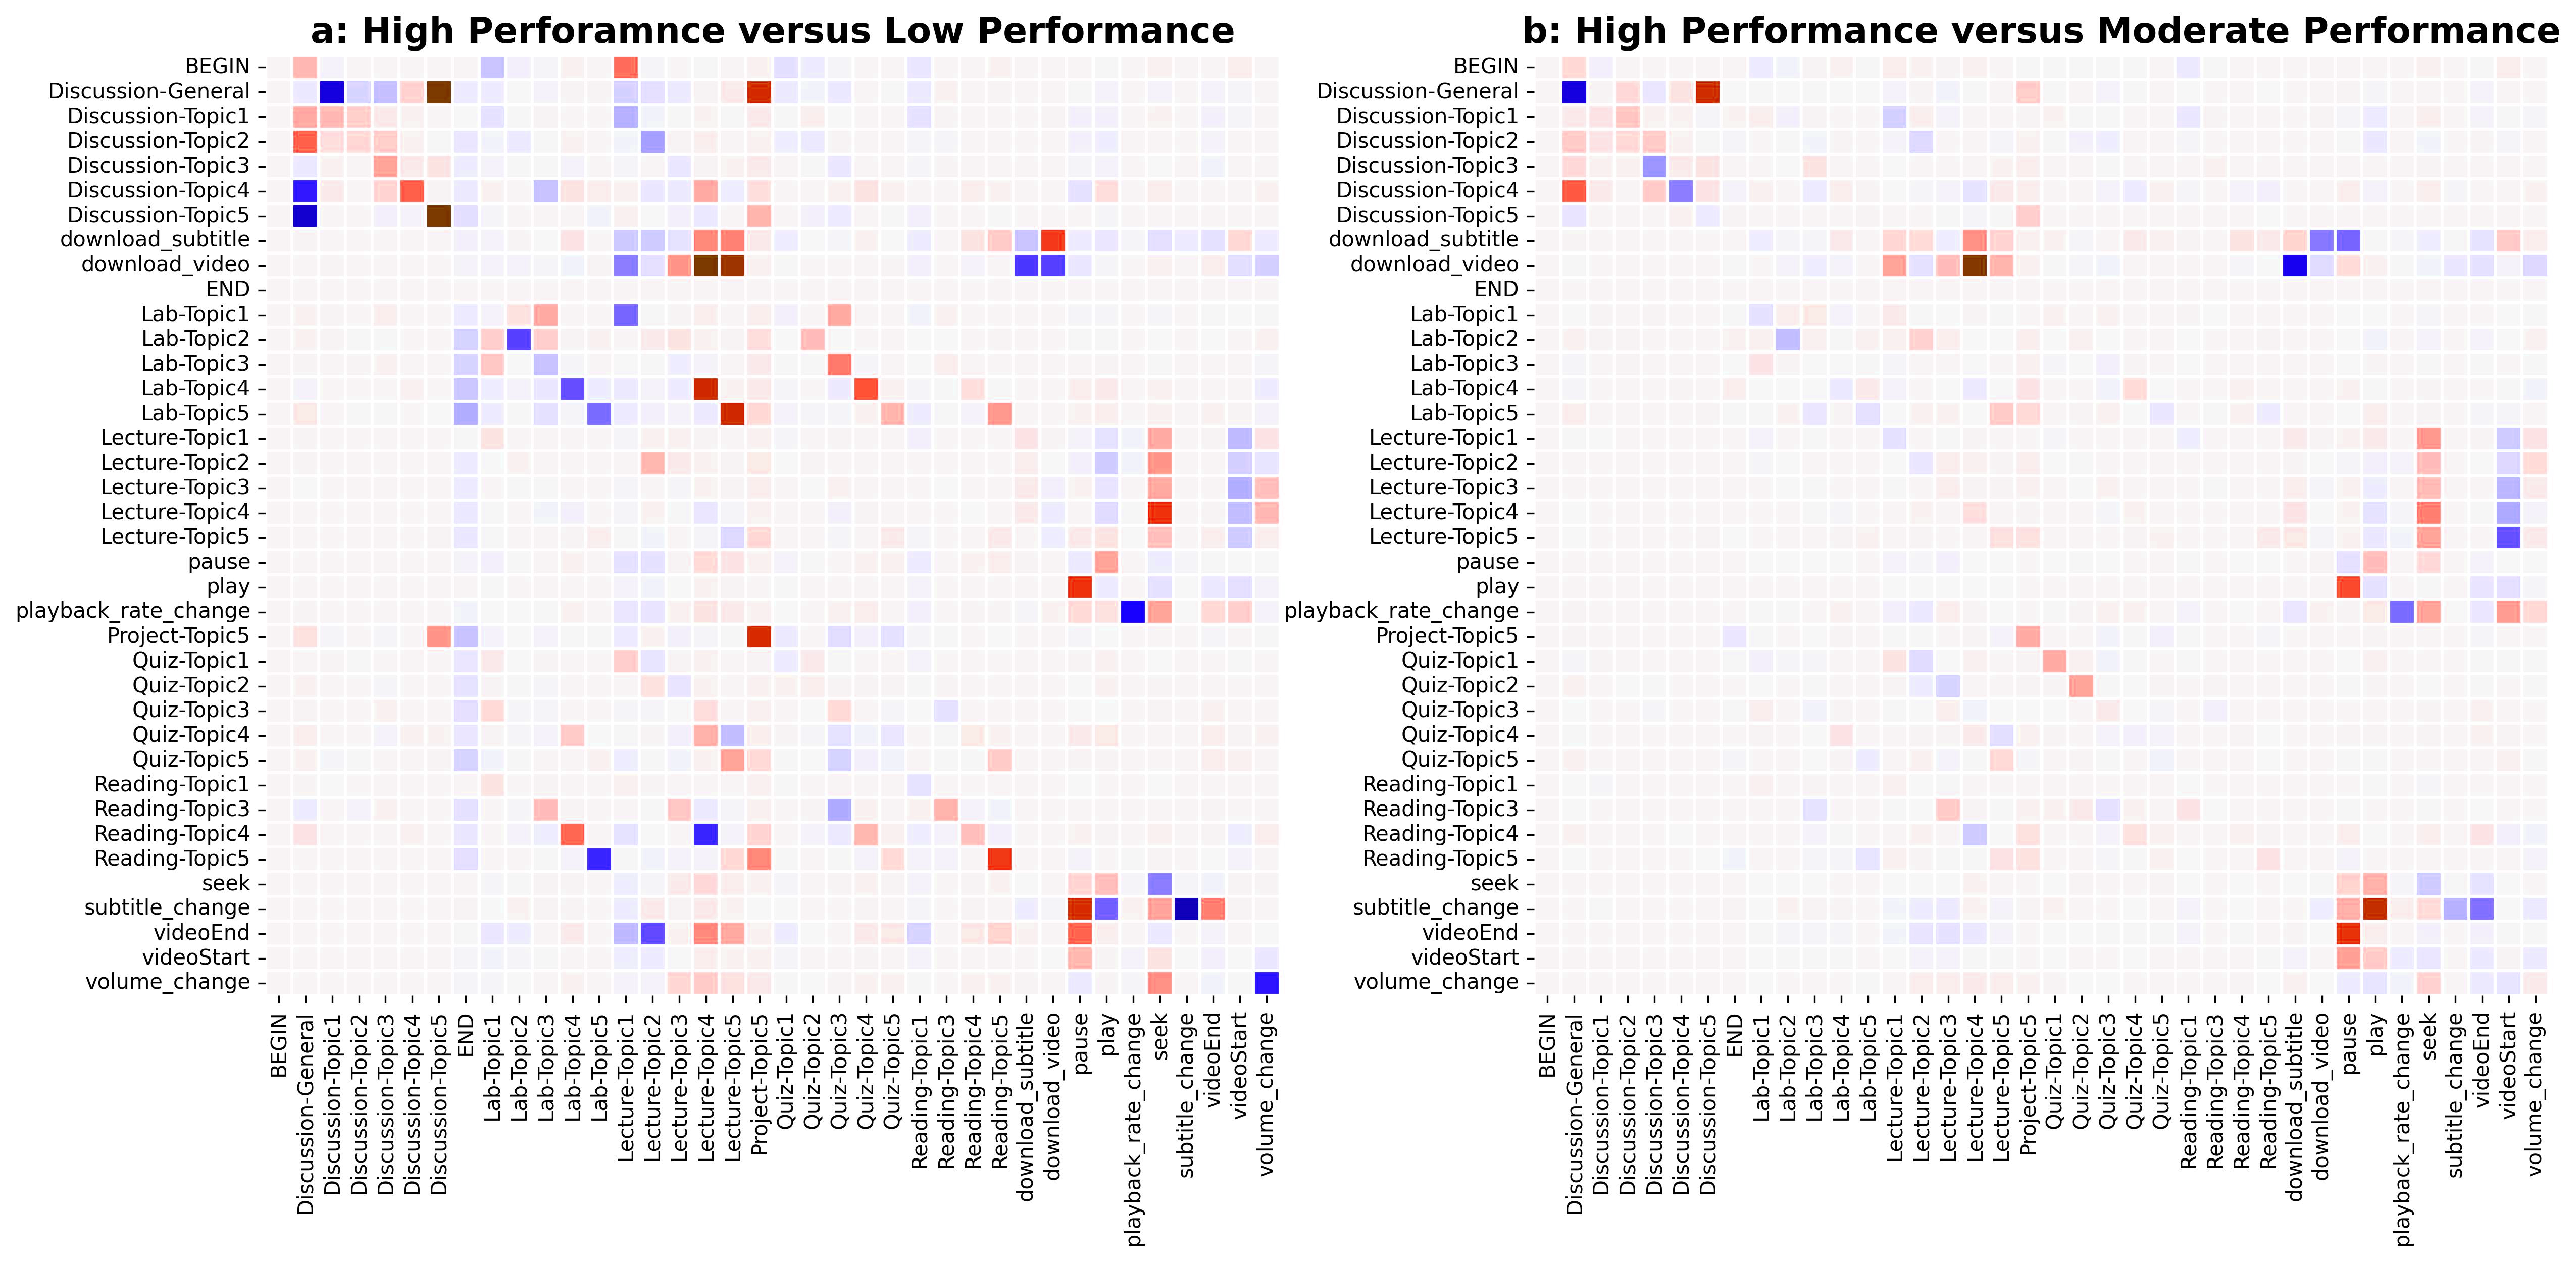 Heatmaps showing transitional differences between the performance groups